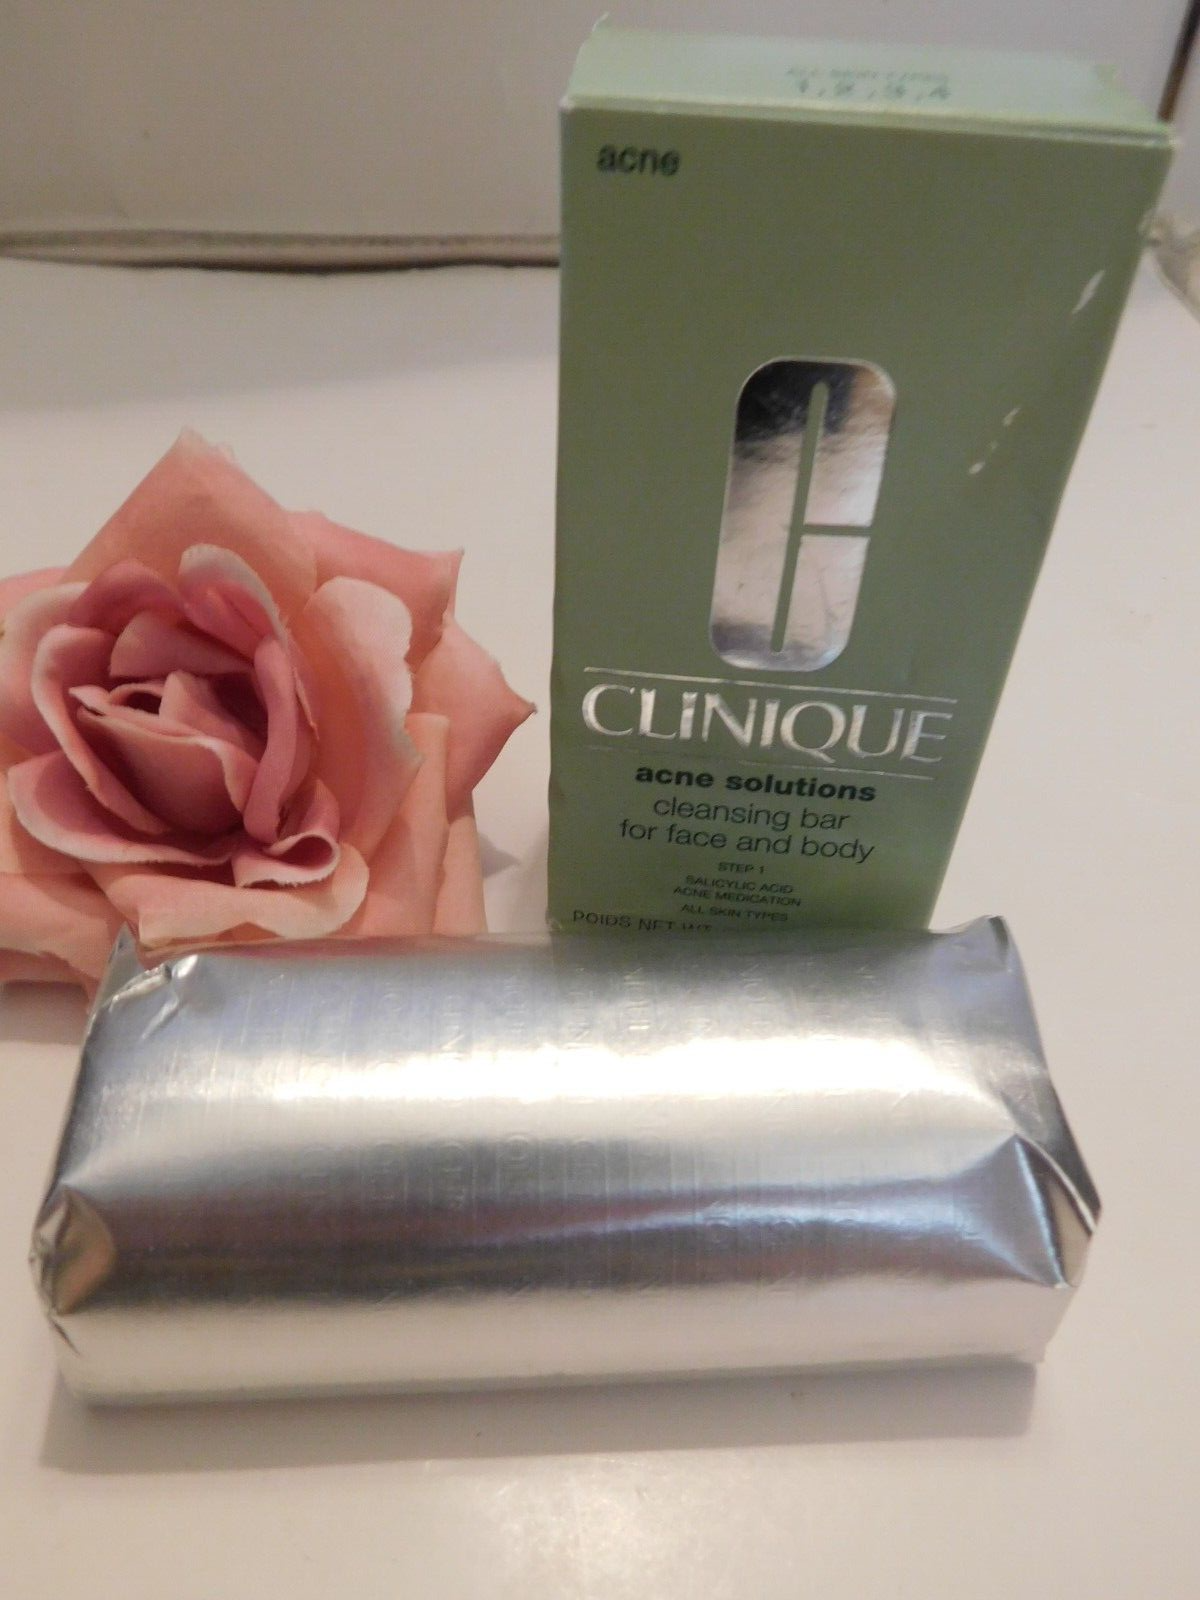 Clinique Acne Solutions Cleansing Bar for Face & Body 5.2 oz Full Size Brand New - $35.00